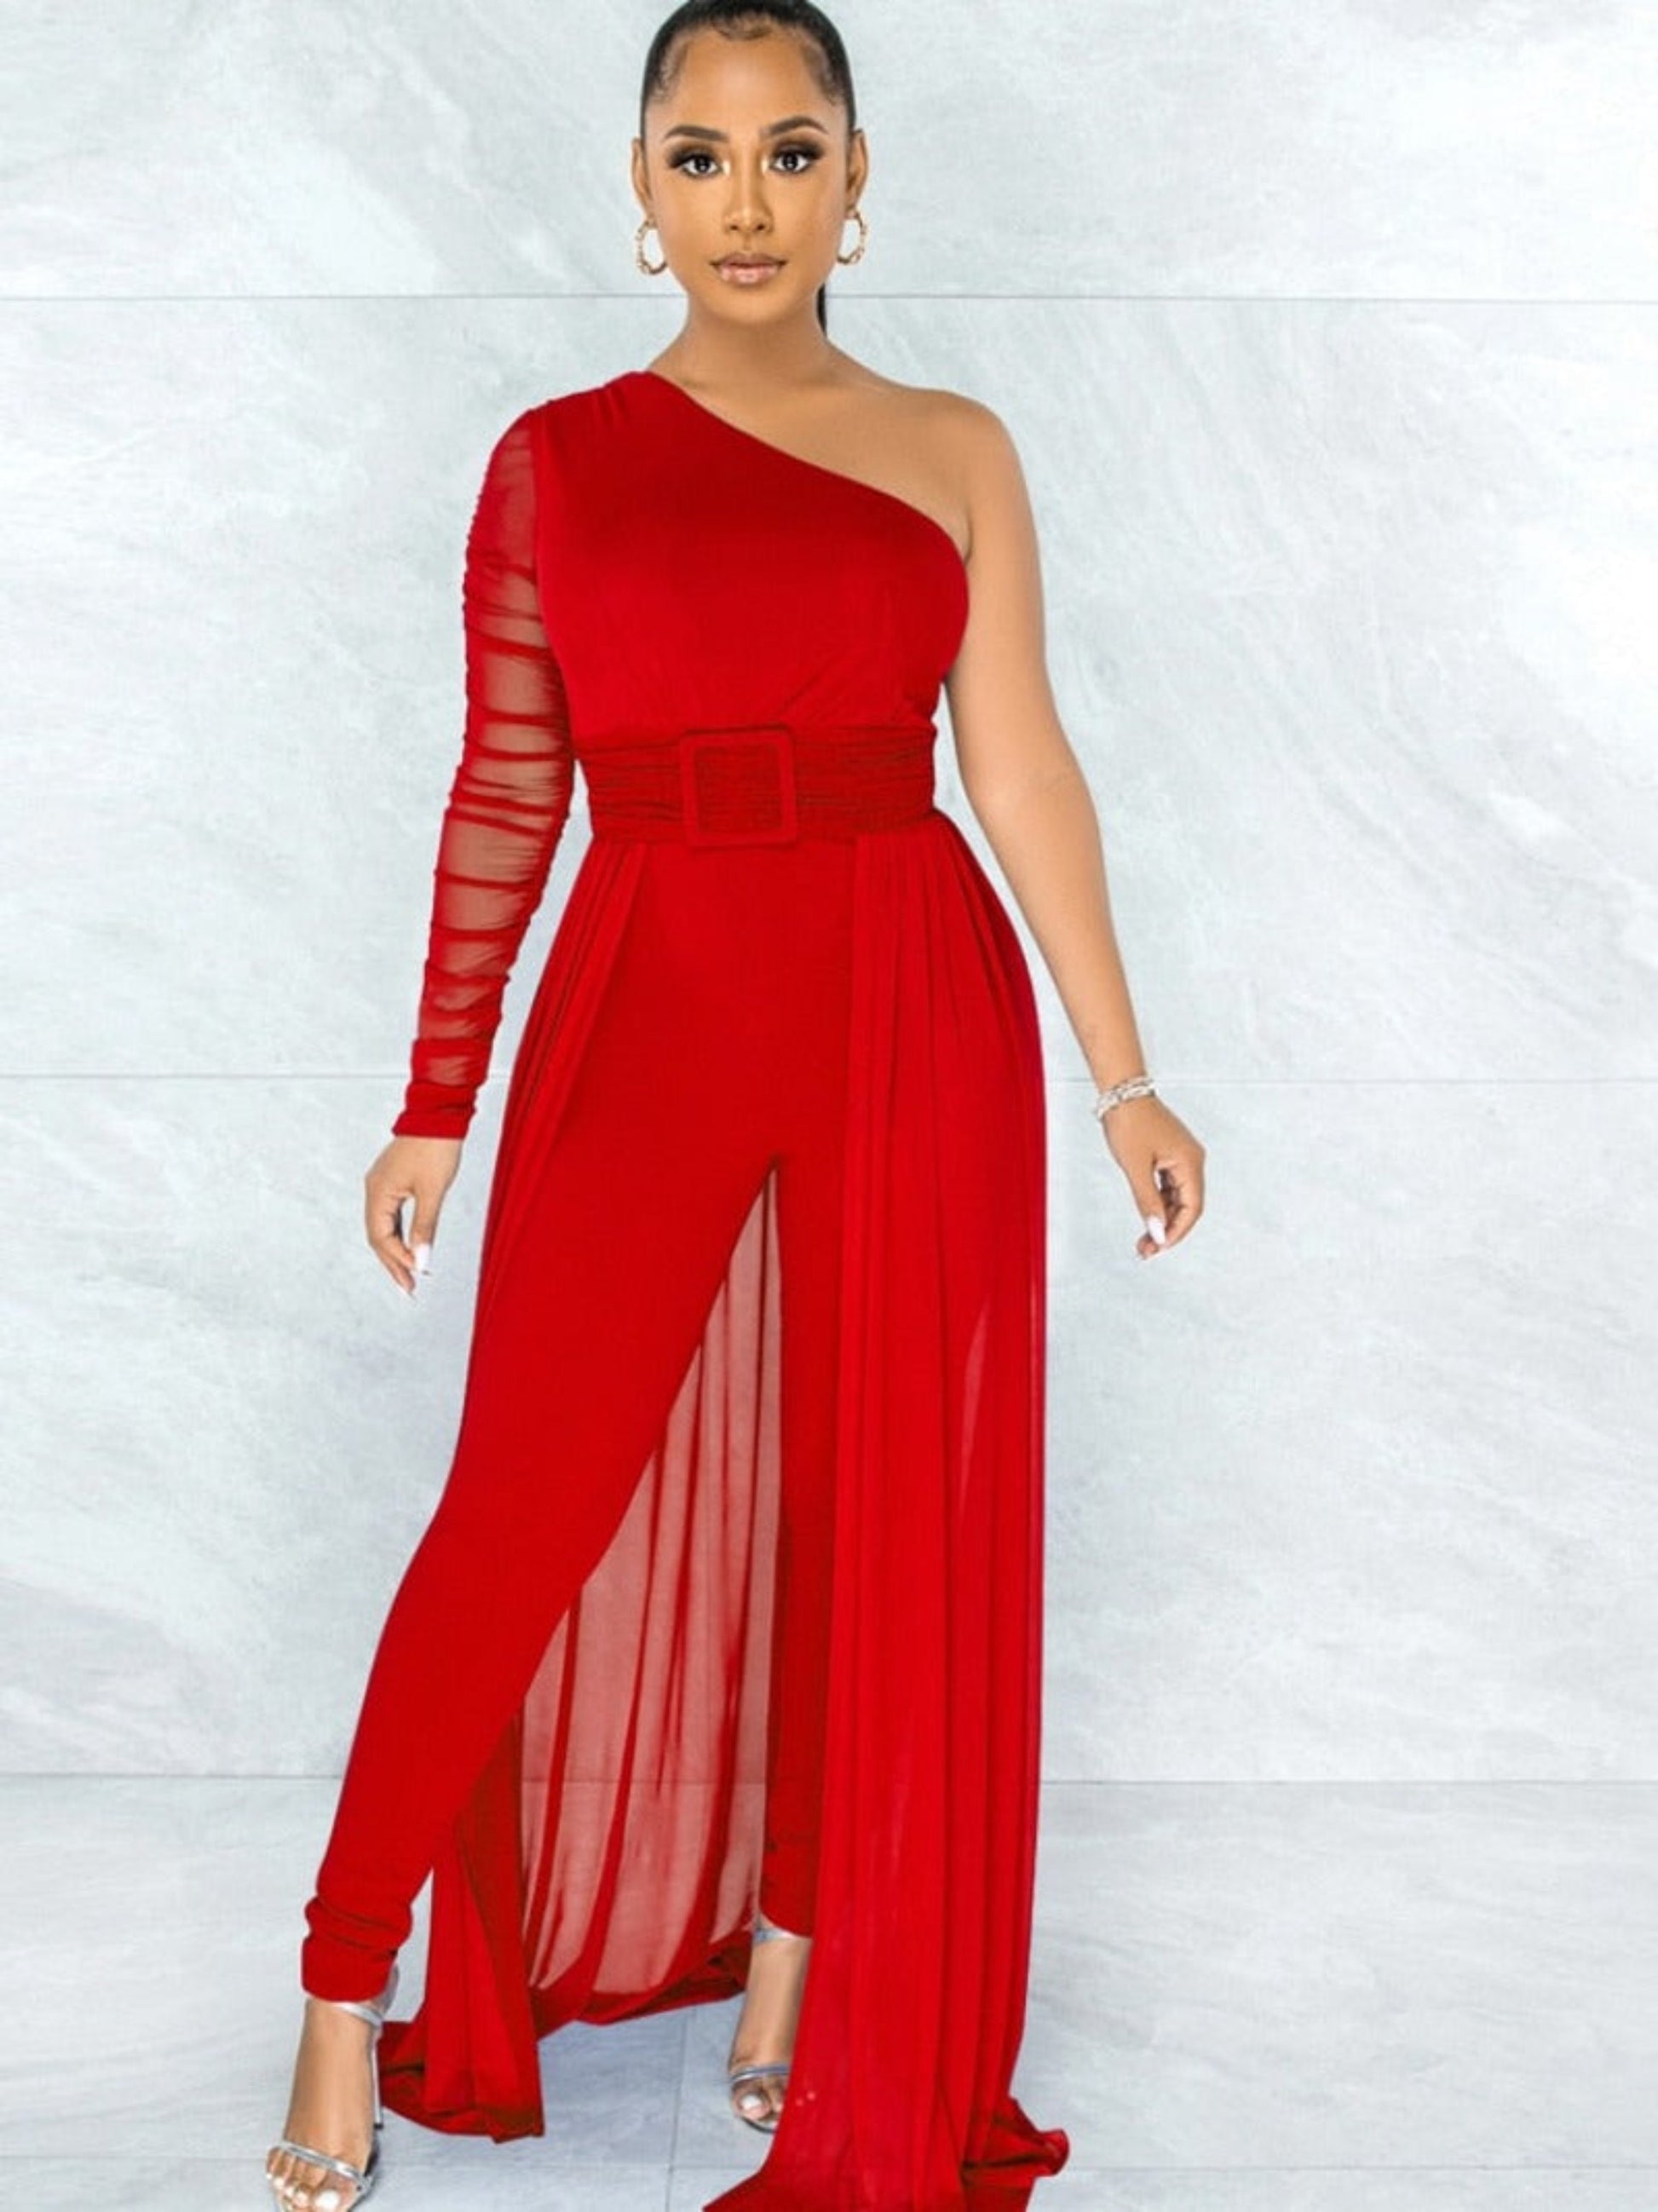 Off Shoulder Formal Dressy Jumpsuits - ProLyf Styles